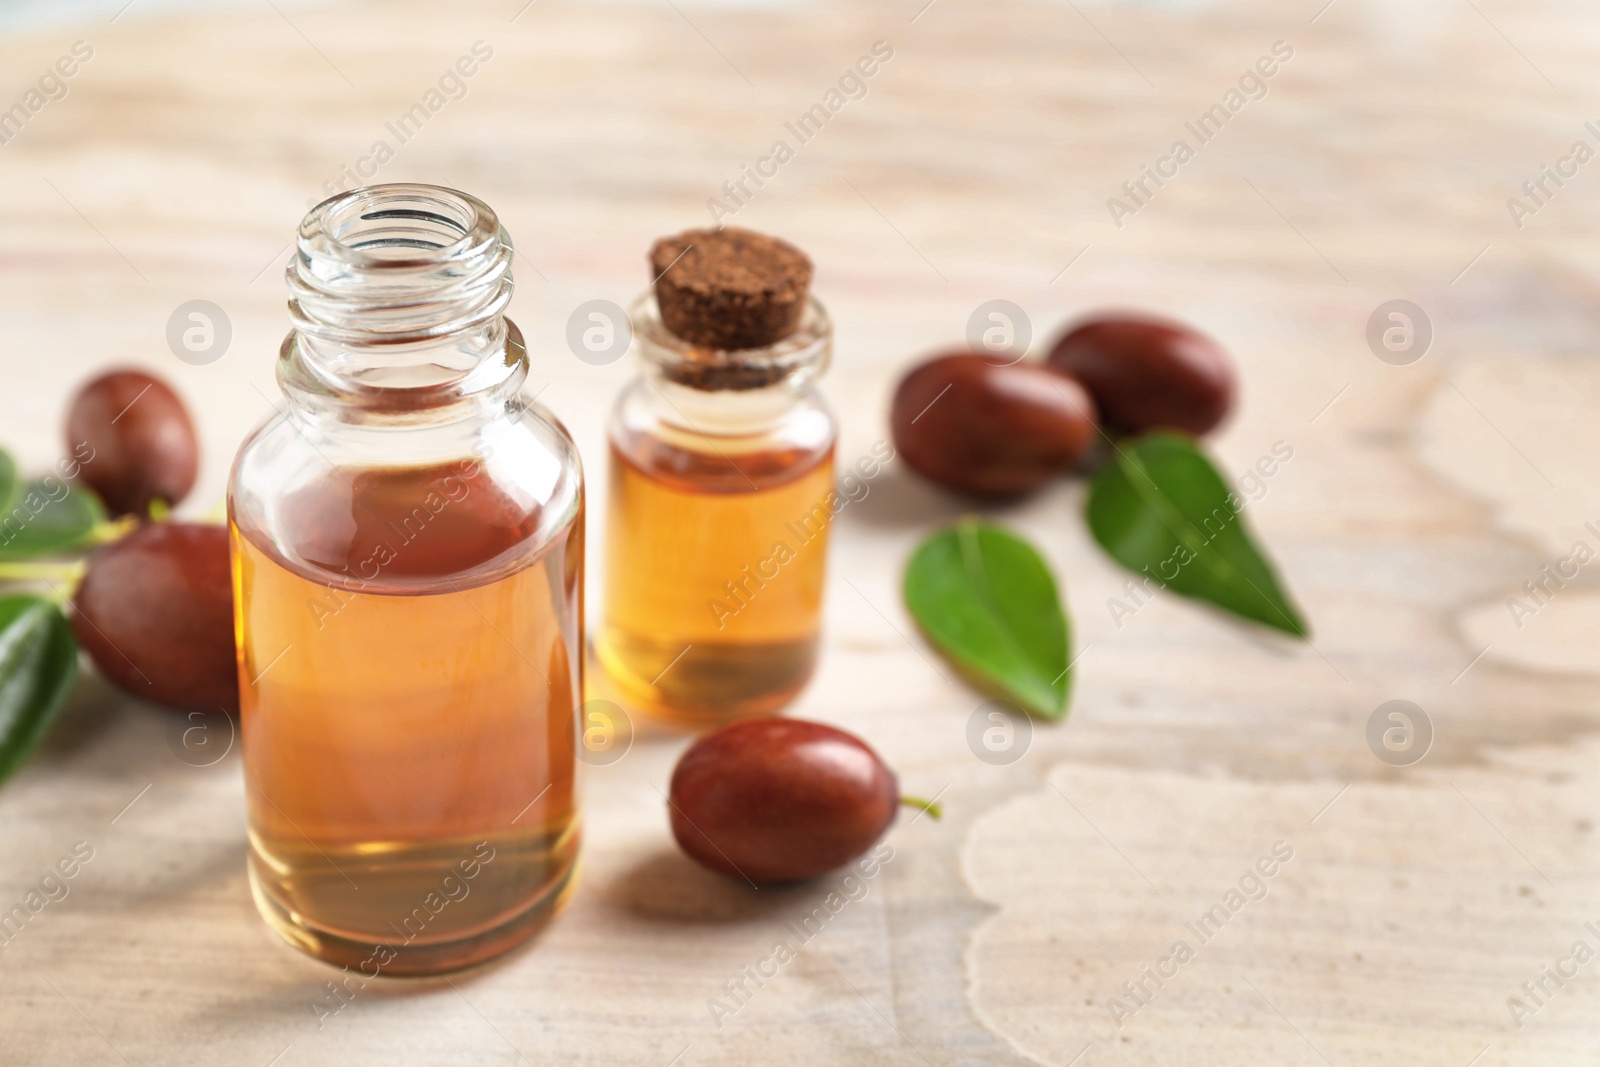 Photo of Glass bottles with jojoba oil and seeds on light table